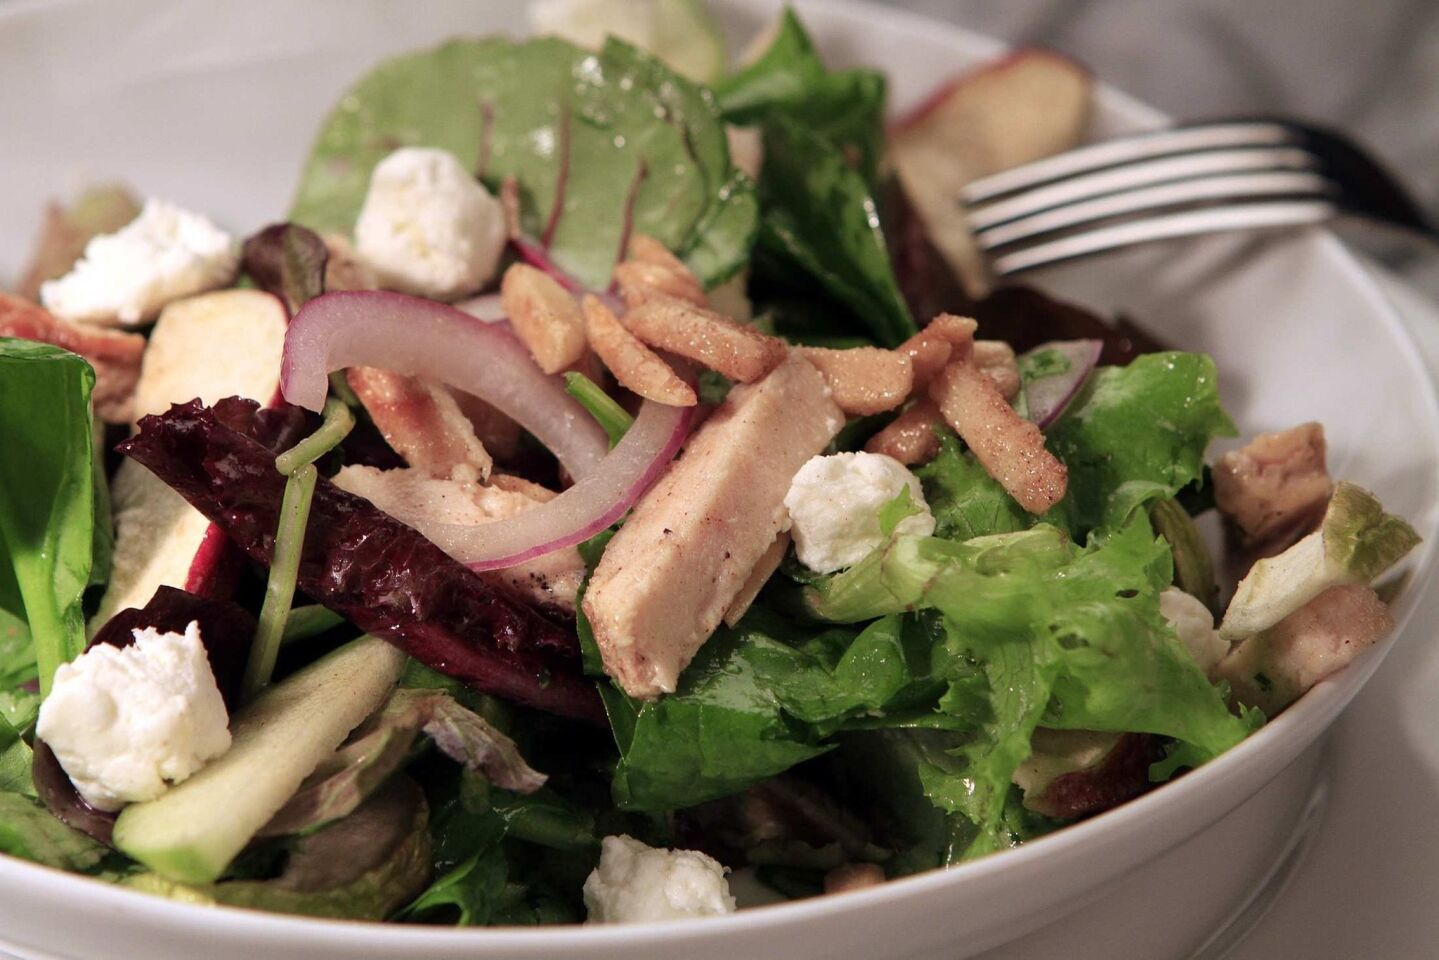 Both tart fresh apple slices and dried apple chips flavor this salad, also tossed with sliced onion, lightly spiced candied almonds, julienned strips of chicken and creamy goat cheese. The salad is tossed with a bright Champagne vinaigrette. Recipe: Nordstrom's chicken, apple and goat cheese salad